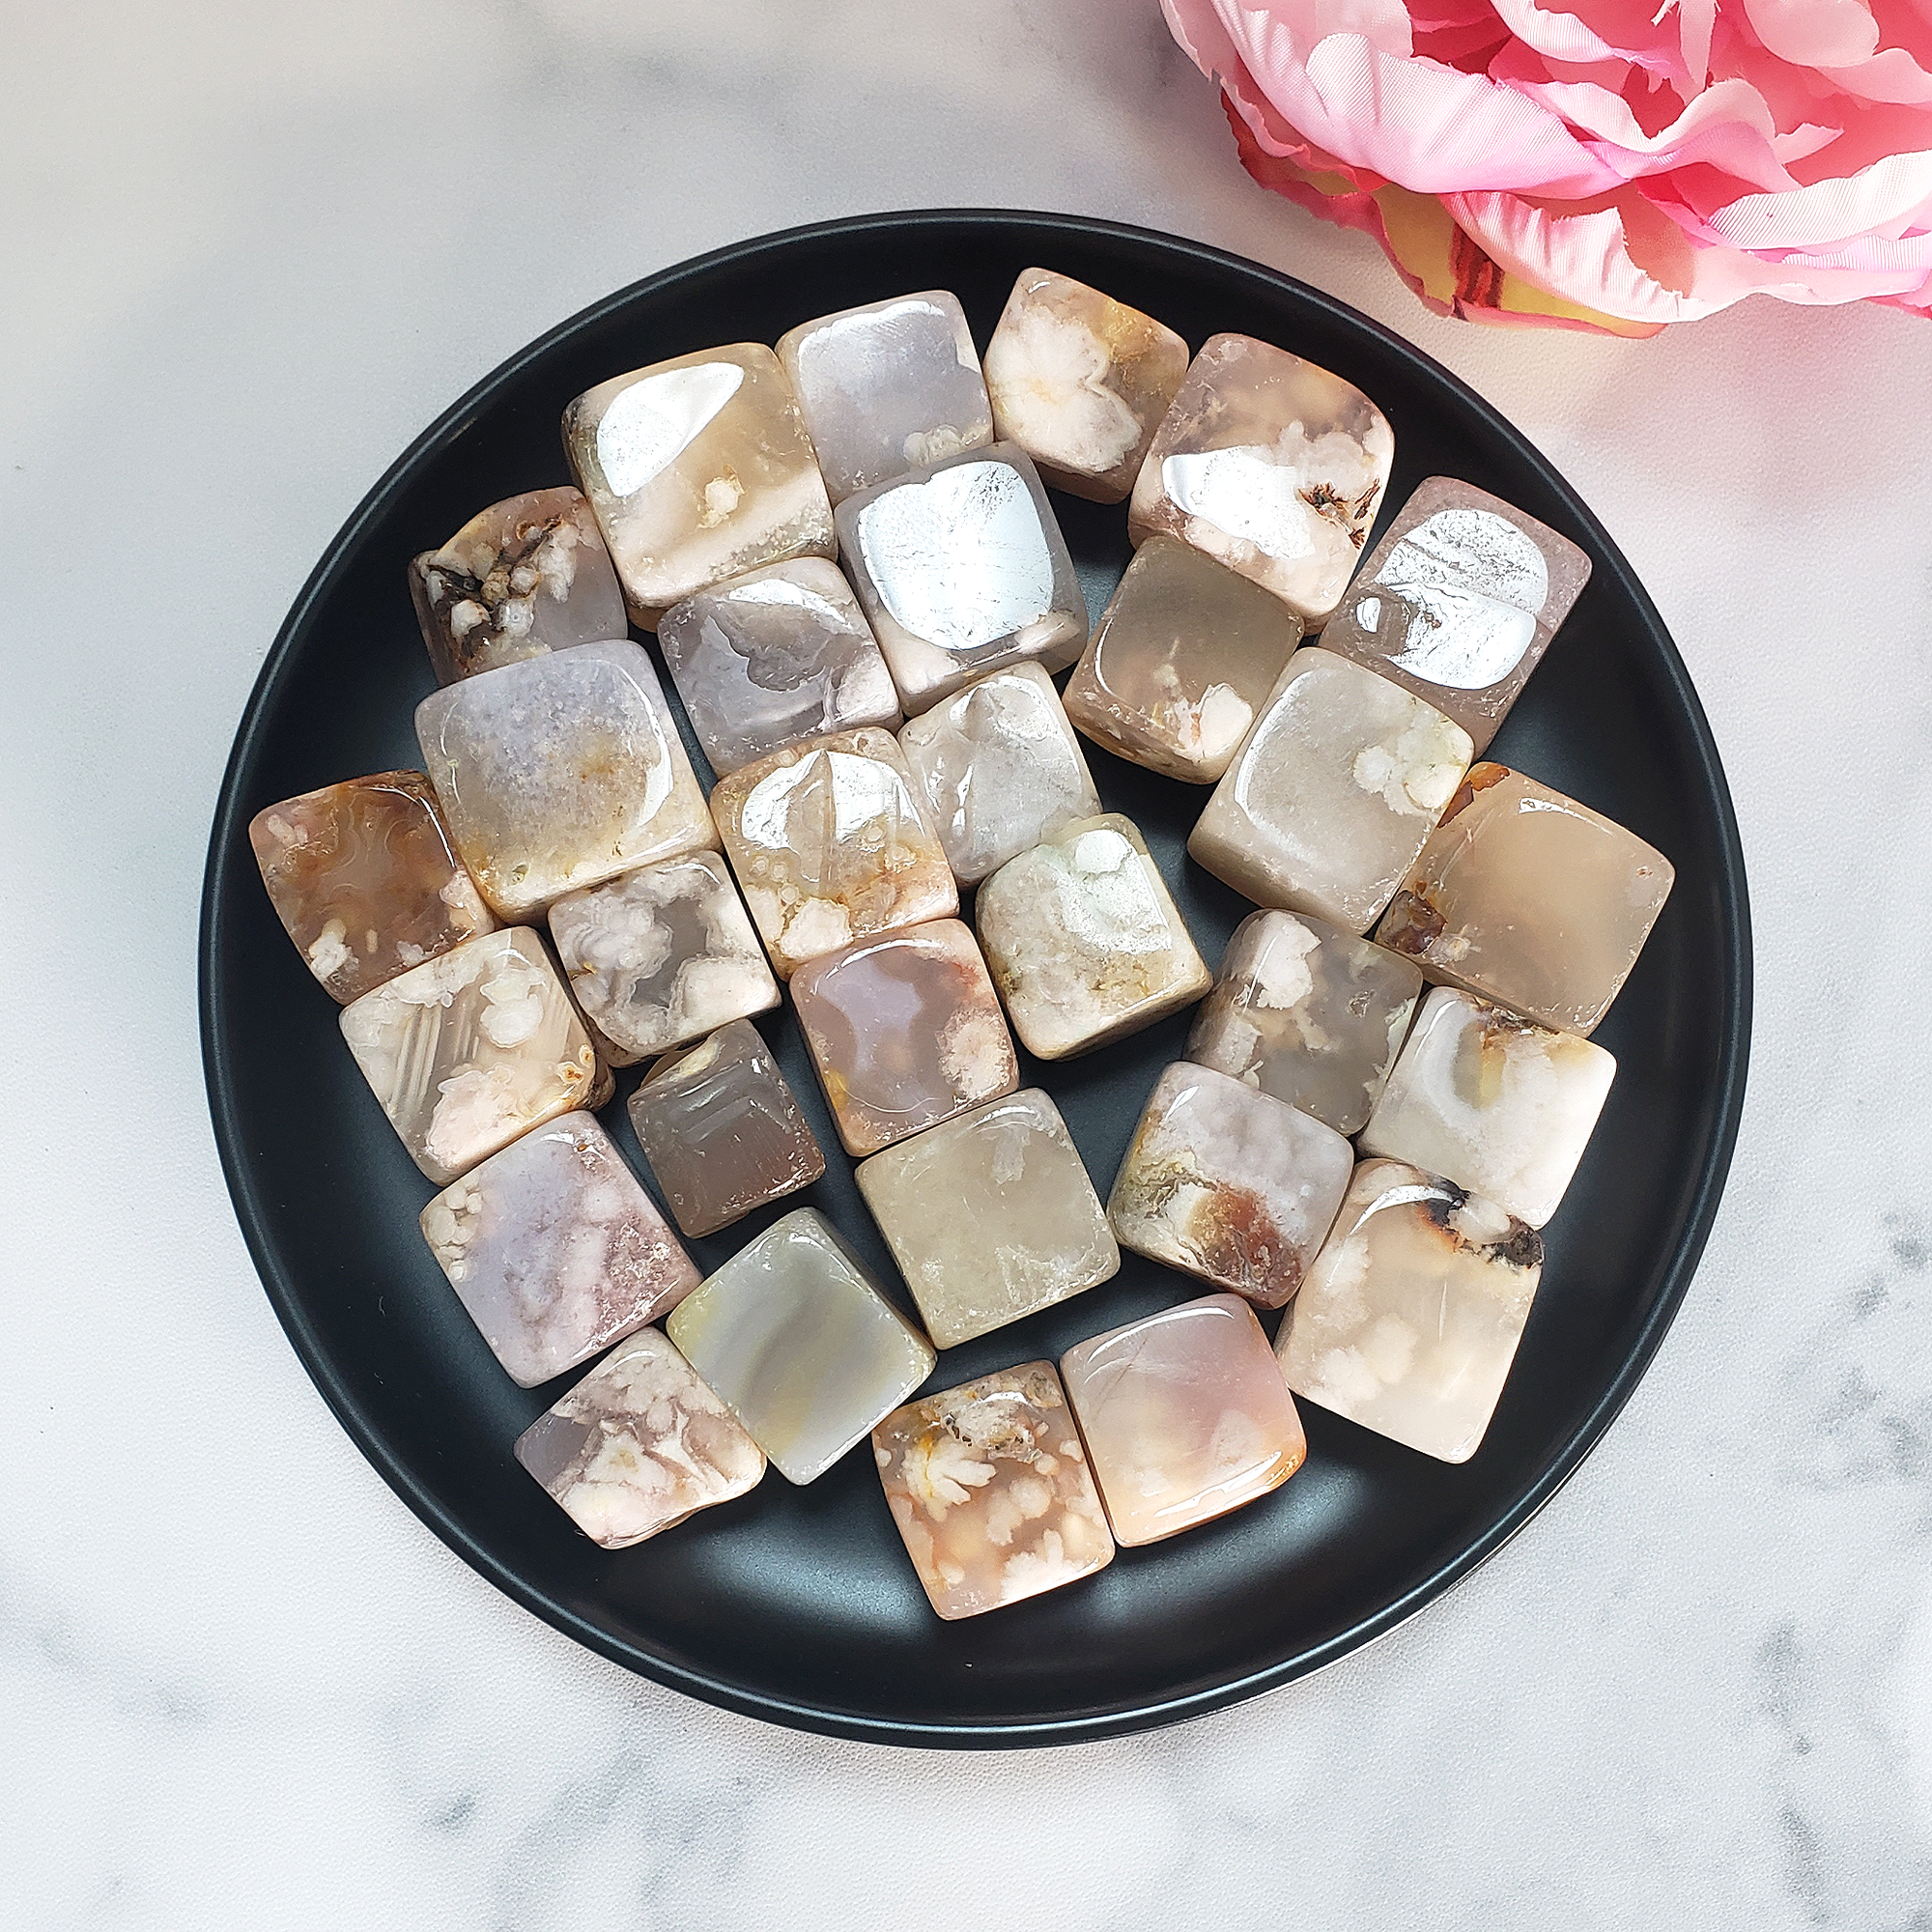 Cherry Blossom Flower Agate Chalcedony Natural Gemstone Tumbled Crystal - Cherry Blossom Agate Cubes in Black Ceramic Bowl